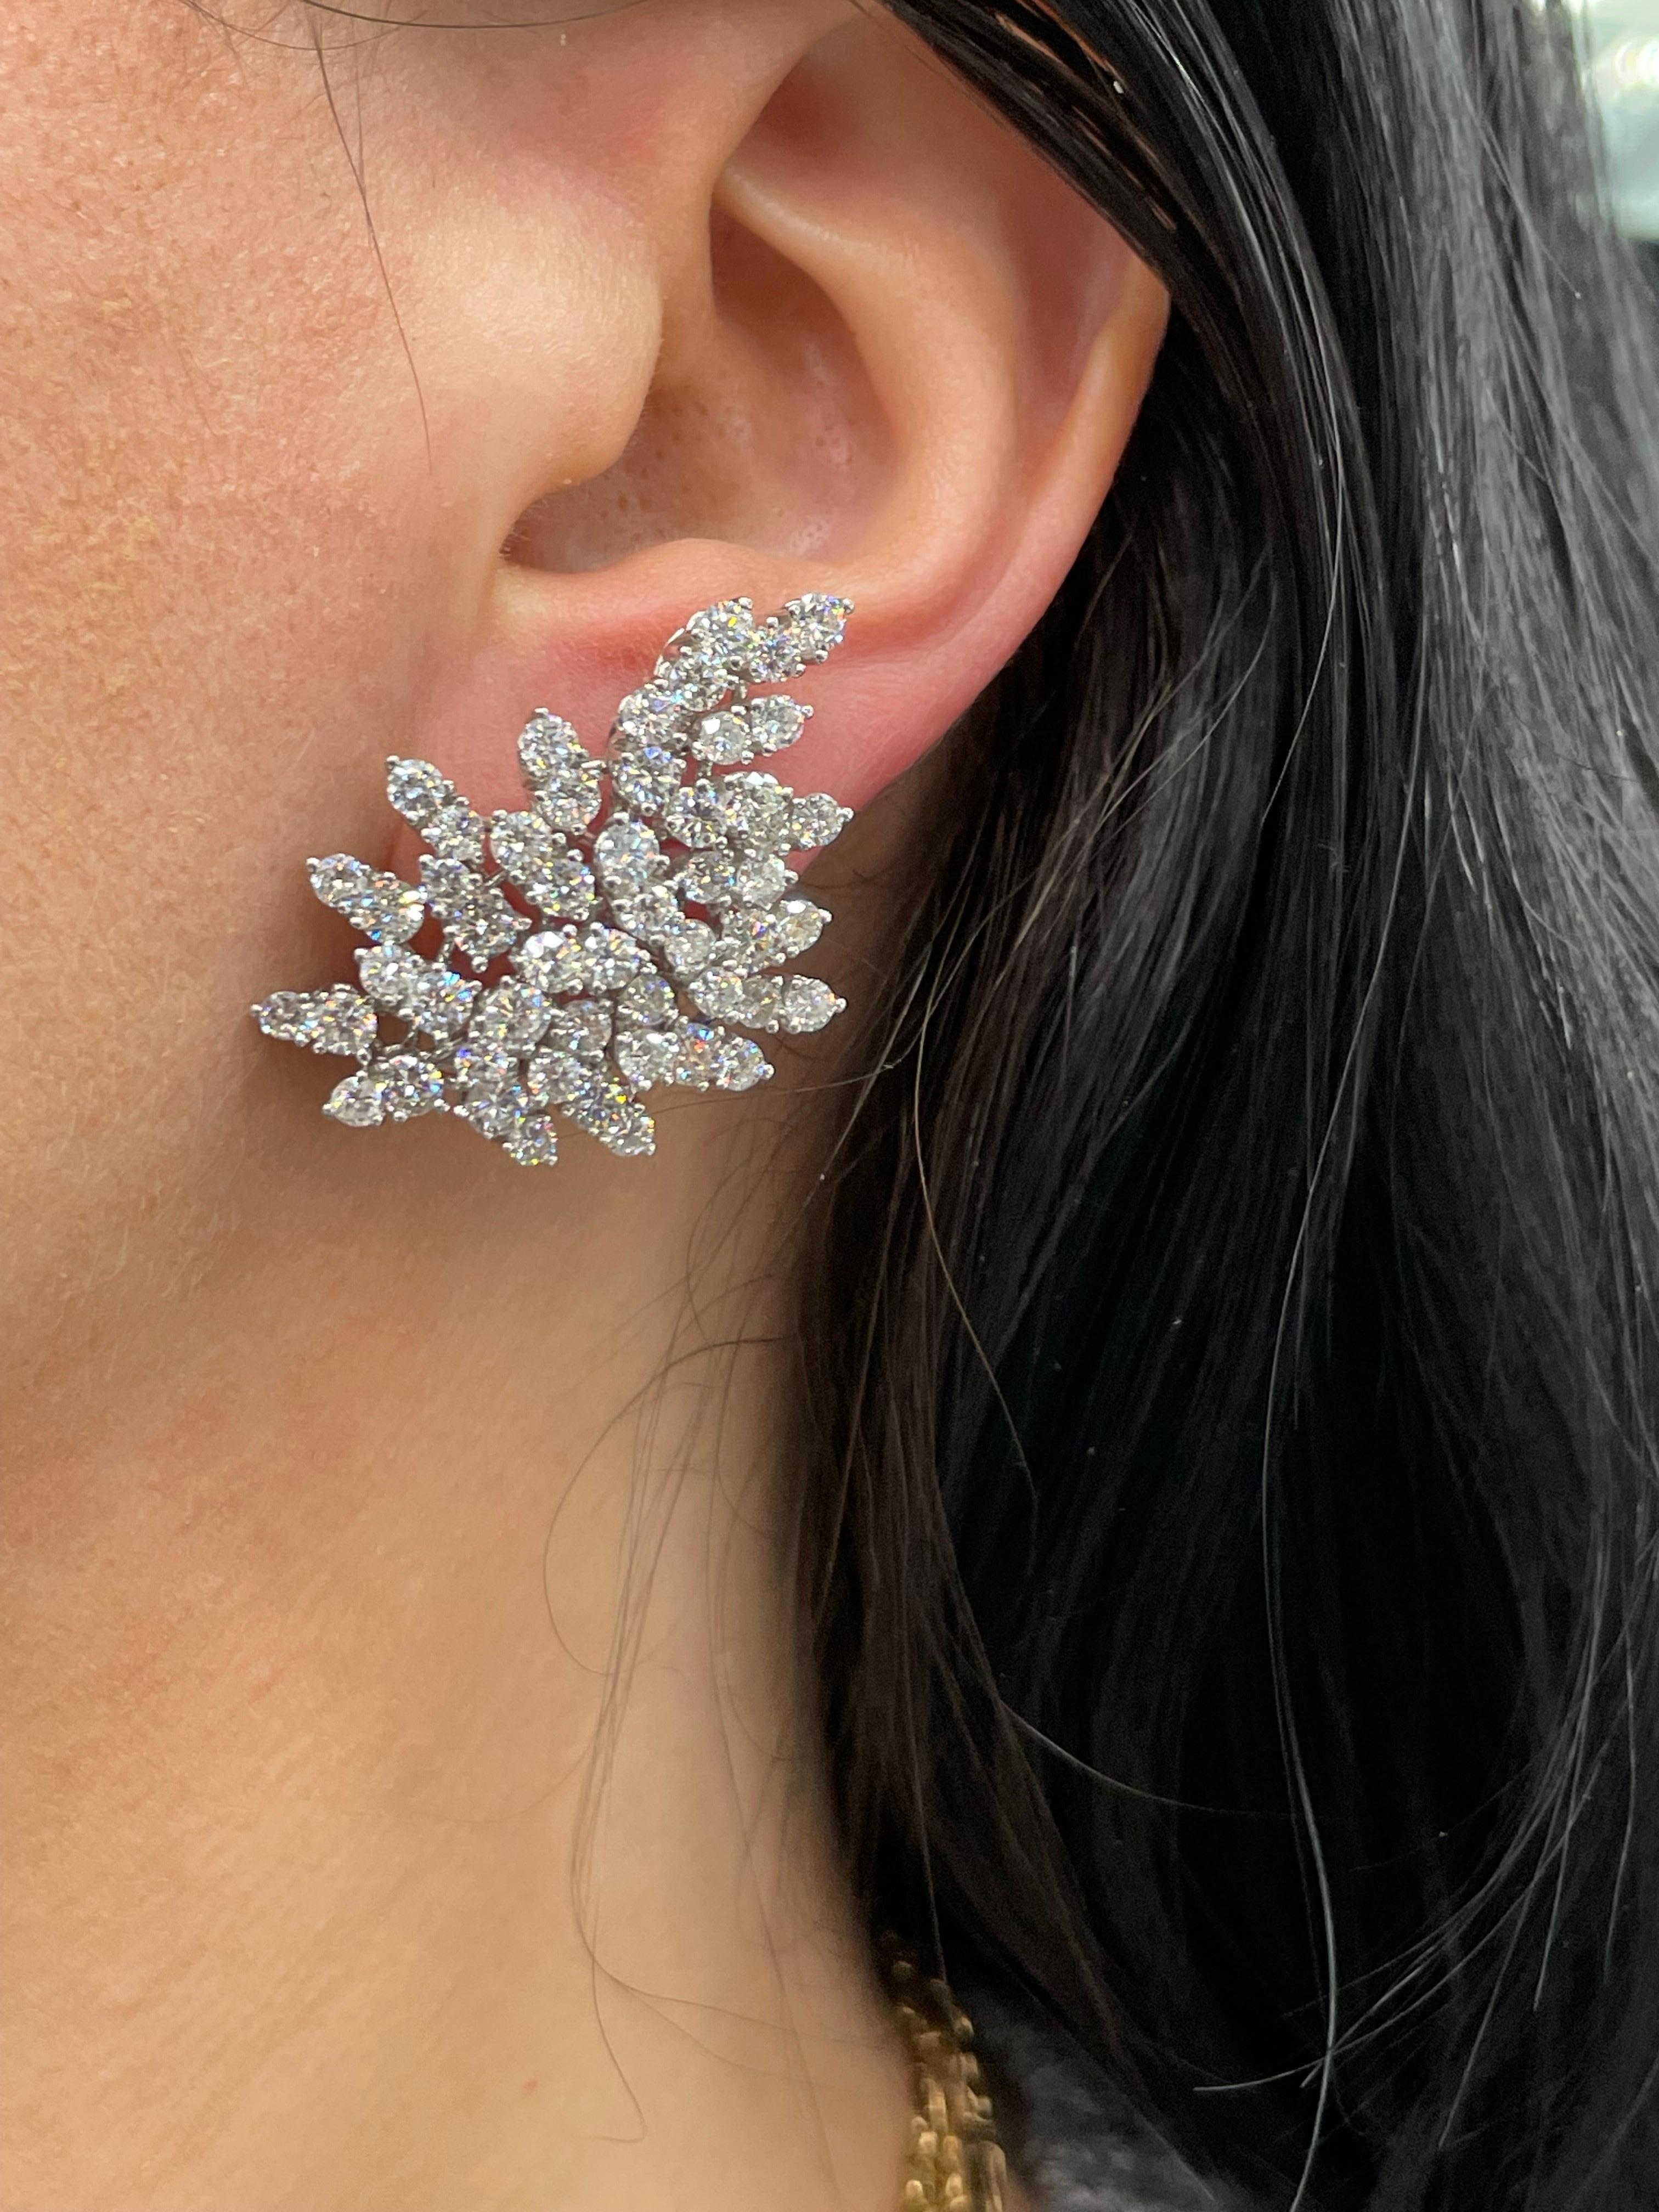 Diamond Starburst cluster earrings featuring 104 Round Brilliants weighing approximately 9.50 Carats, in 18 Karat White Gold.
A gold hoop behind the ear to add a Pearl, Gemstone drop.
Color G-H
Clarity SI